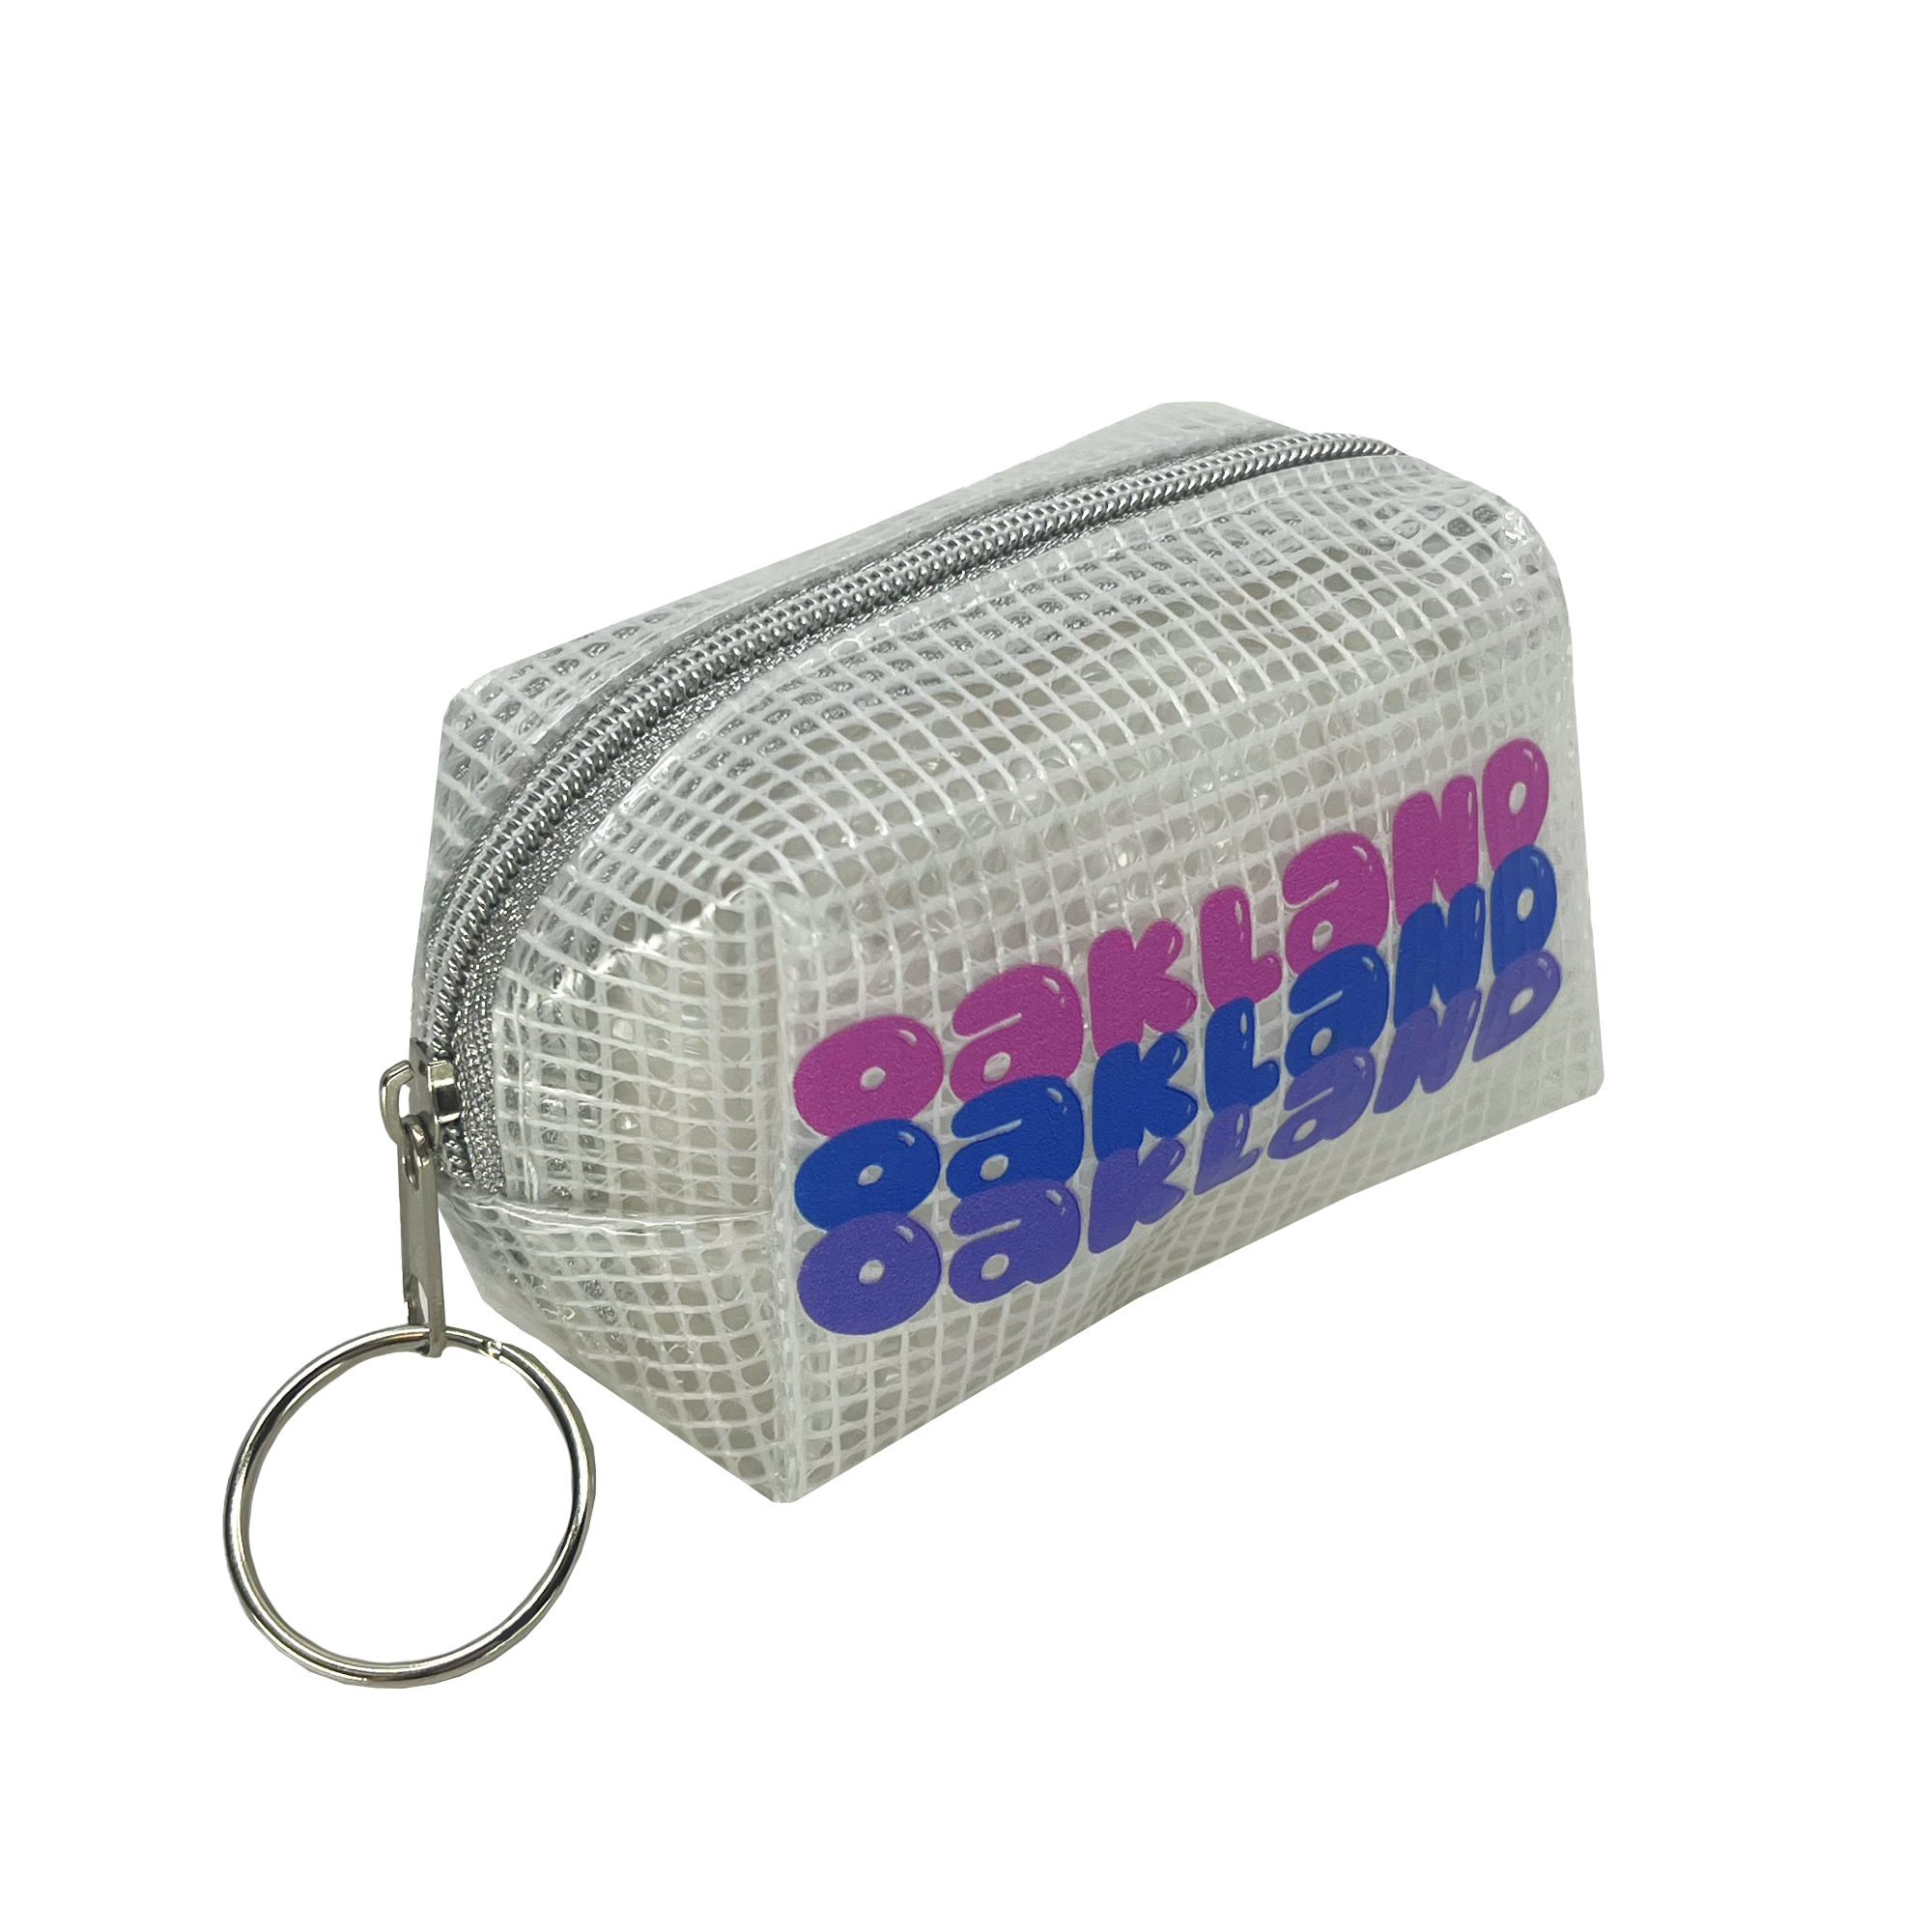 Side view of clear plastic zippered travel pouch with bubble font OAKLAND wordmark repeated in pink, blue, and purple.